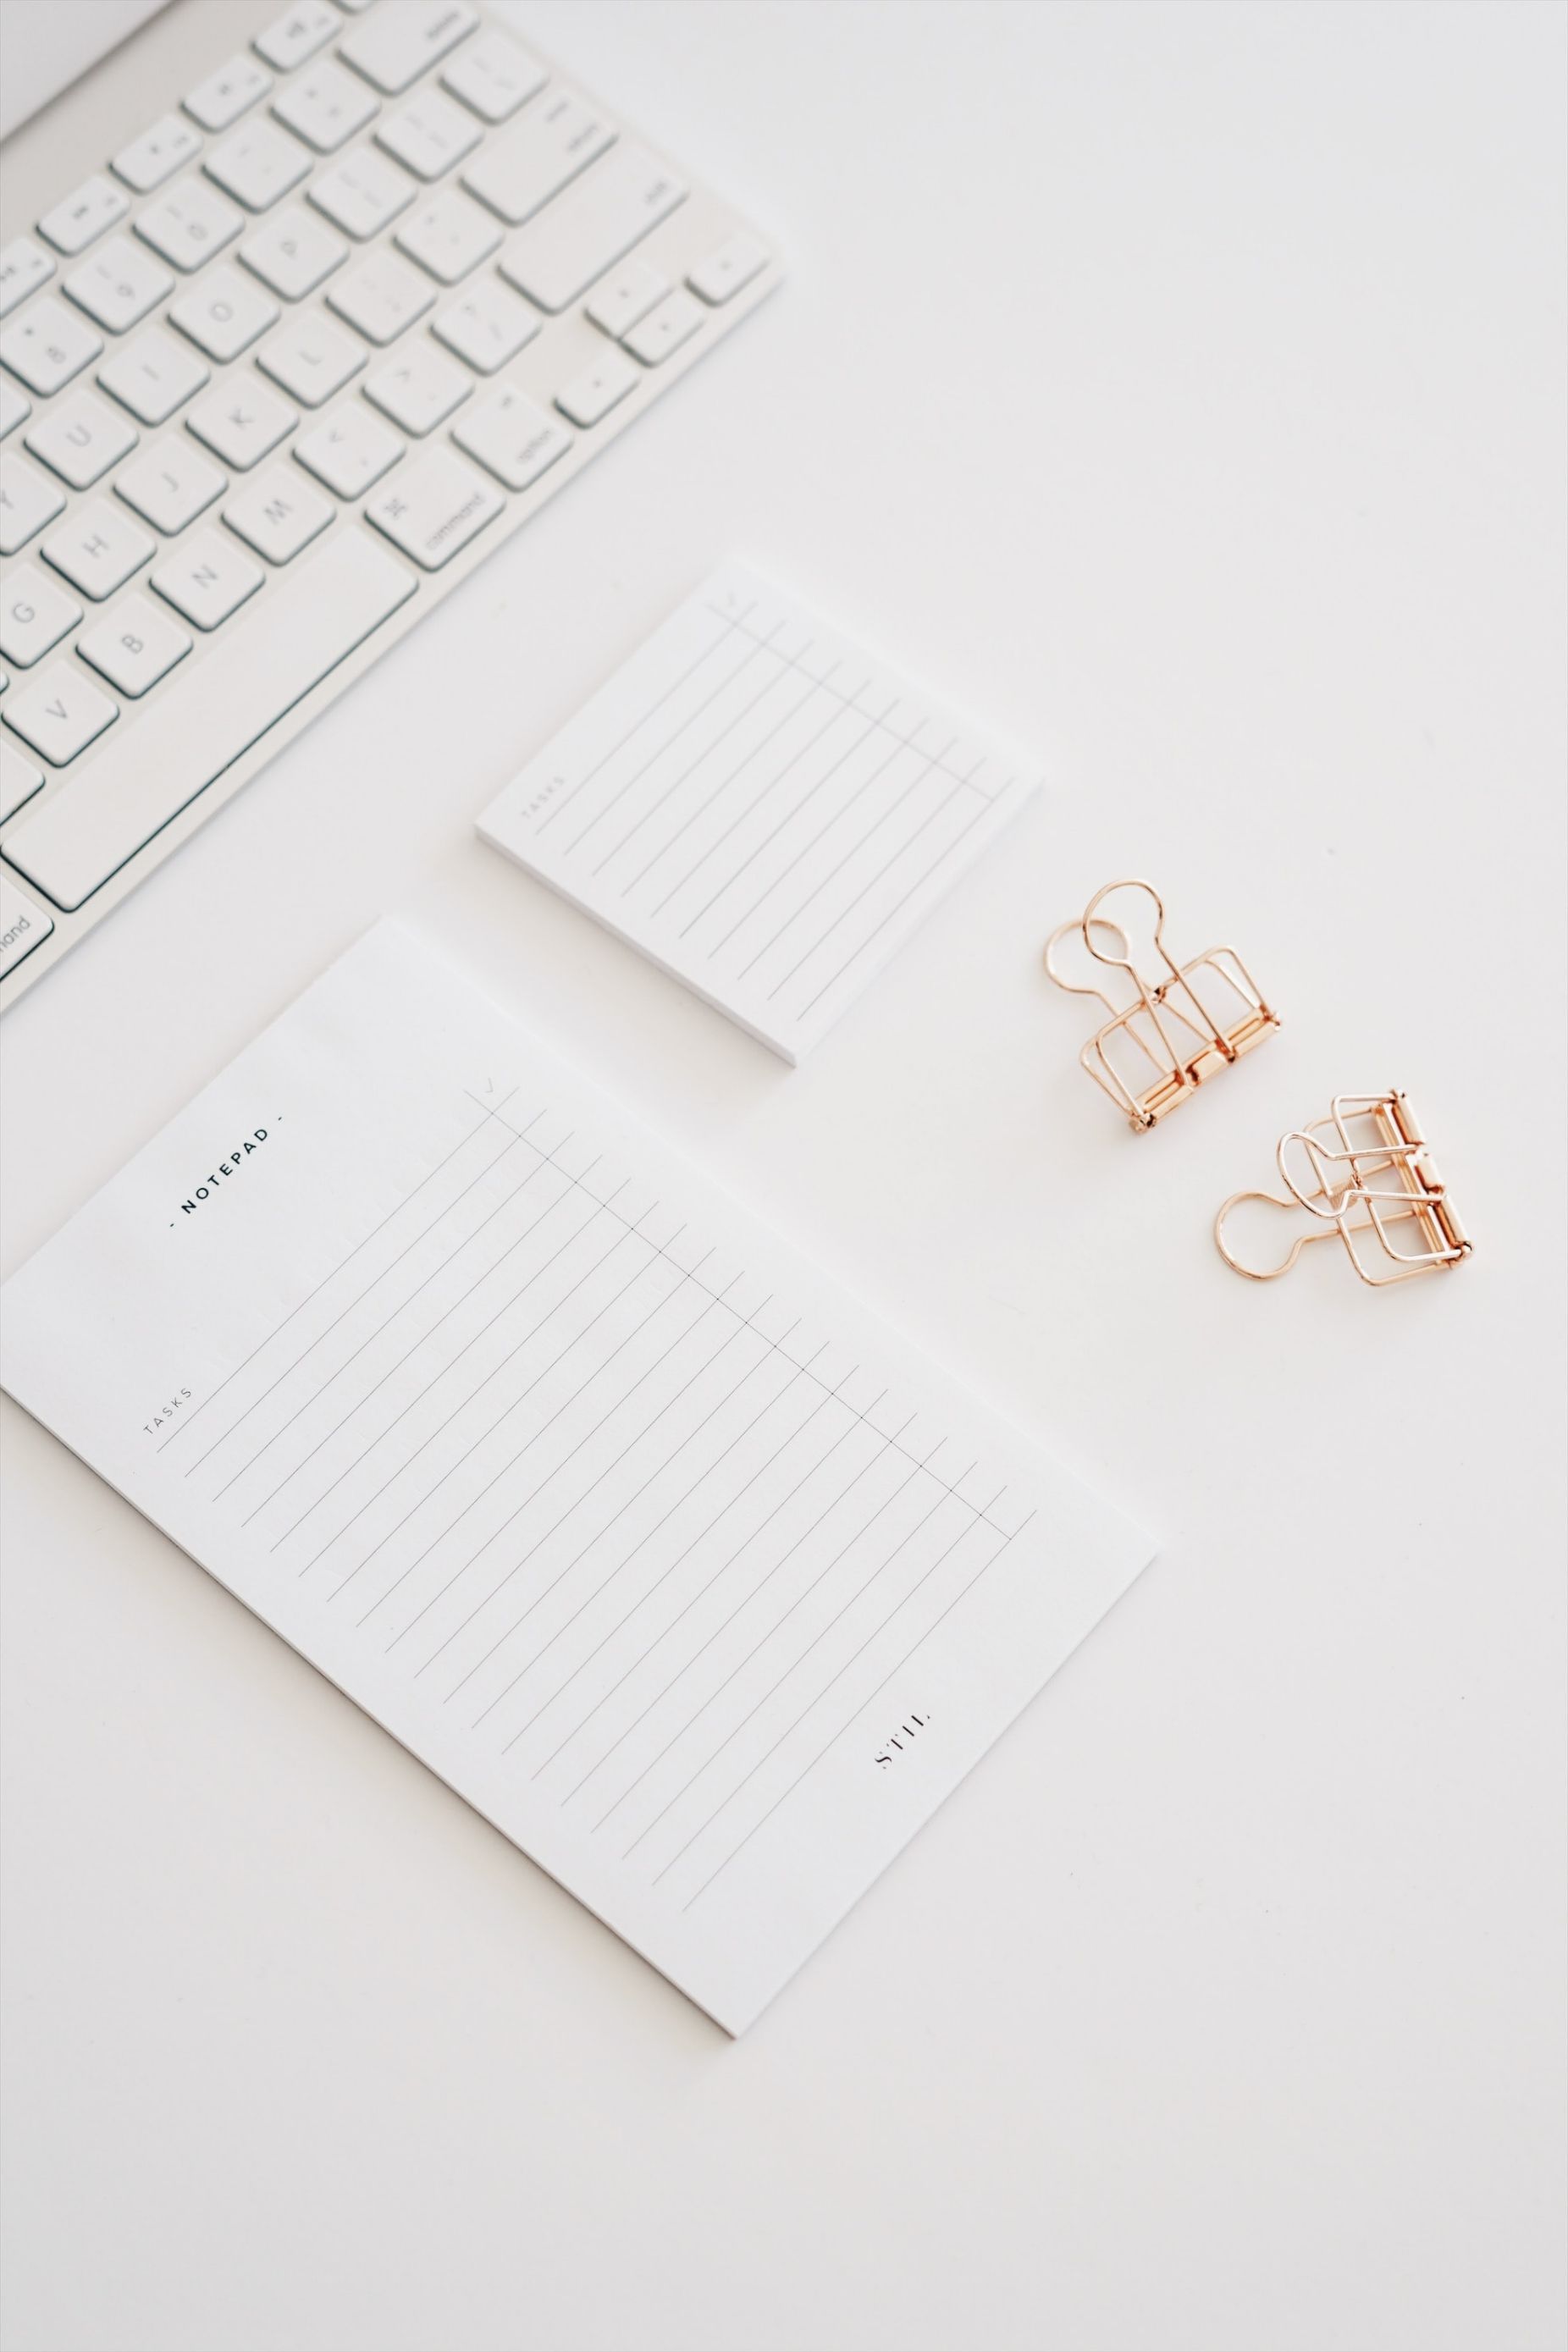 Notepad & Binder Clips On A White Table — Personalised Stationery in Dubbo, NSW